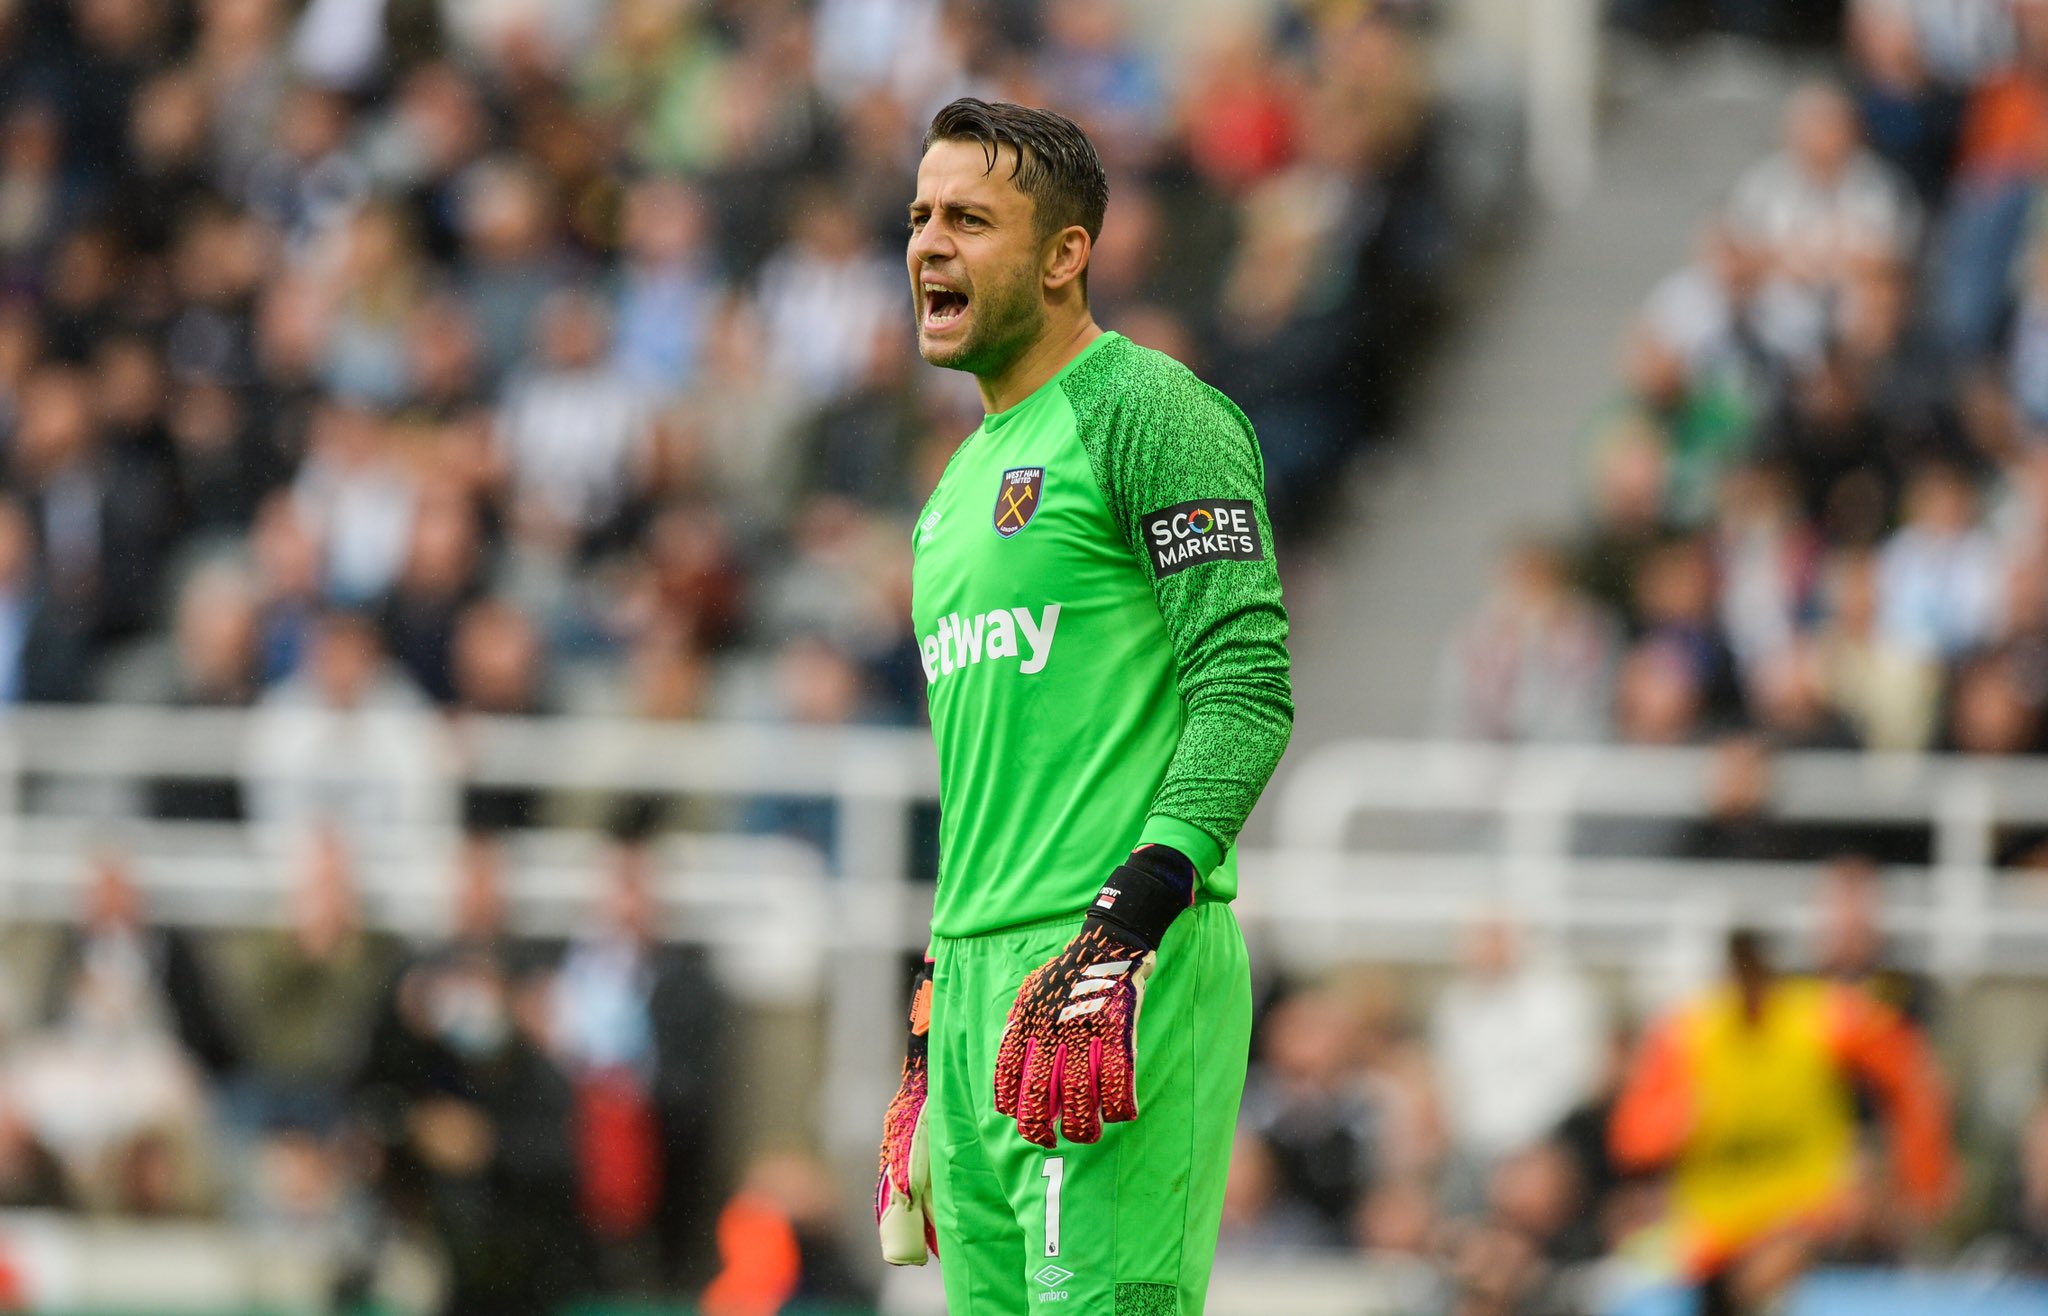 We have to be calm of our situation as it’s too early in season, postulates Lukasz Fabianski